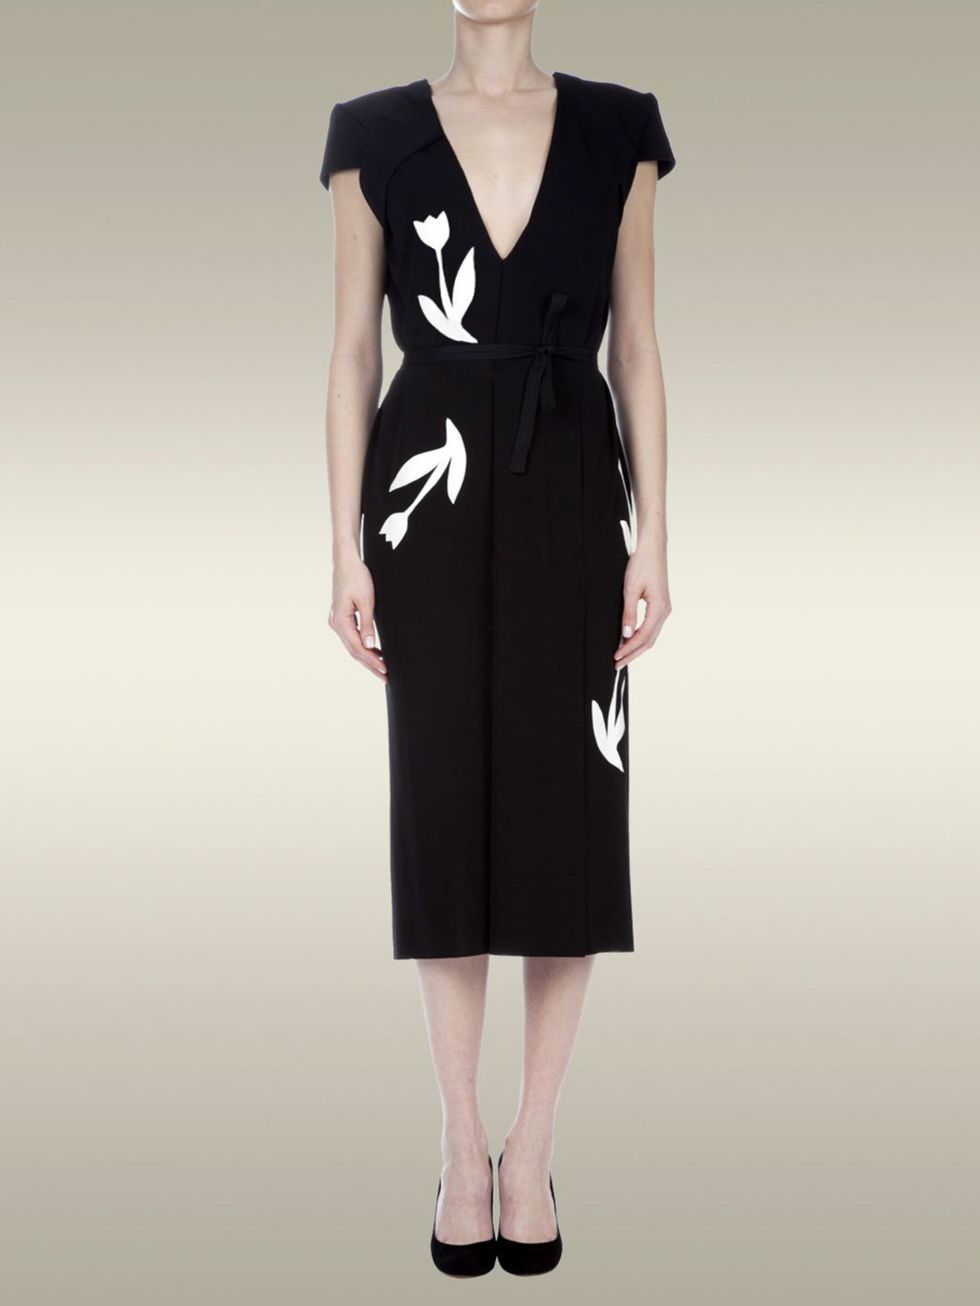 <p>Roland Mouret's limited-edition Mawmsey dress.</p>